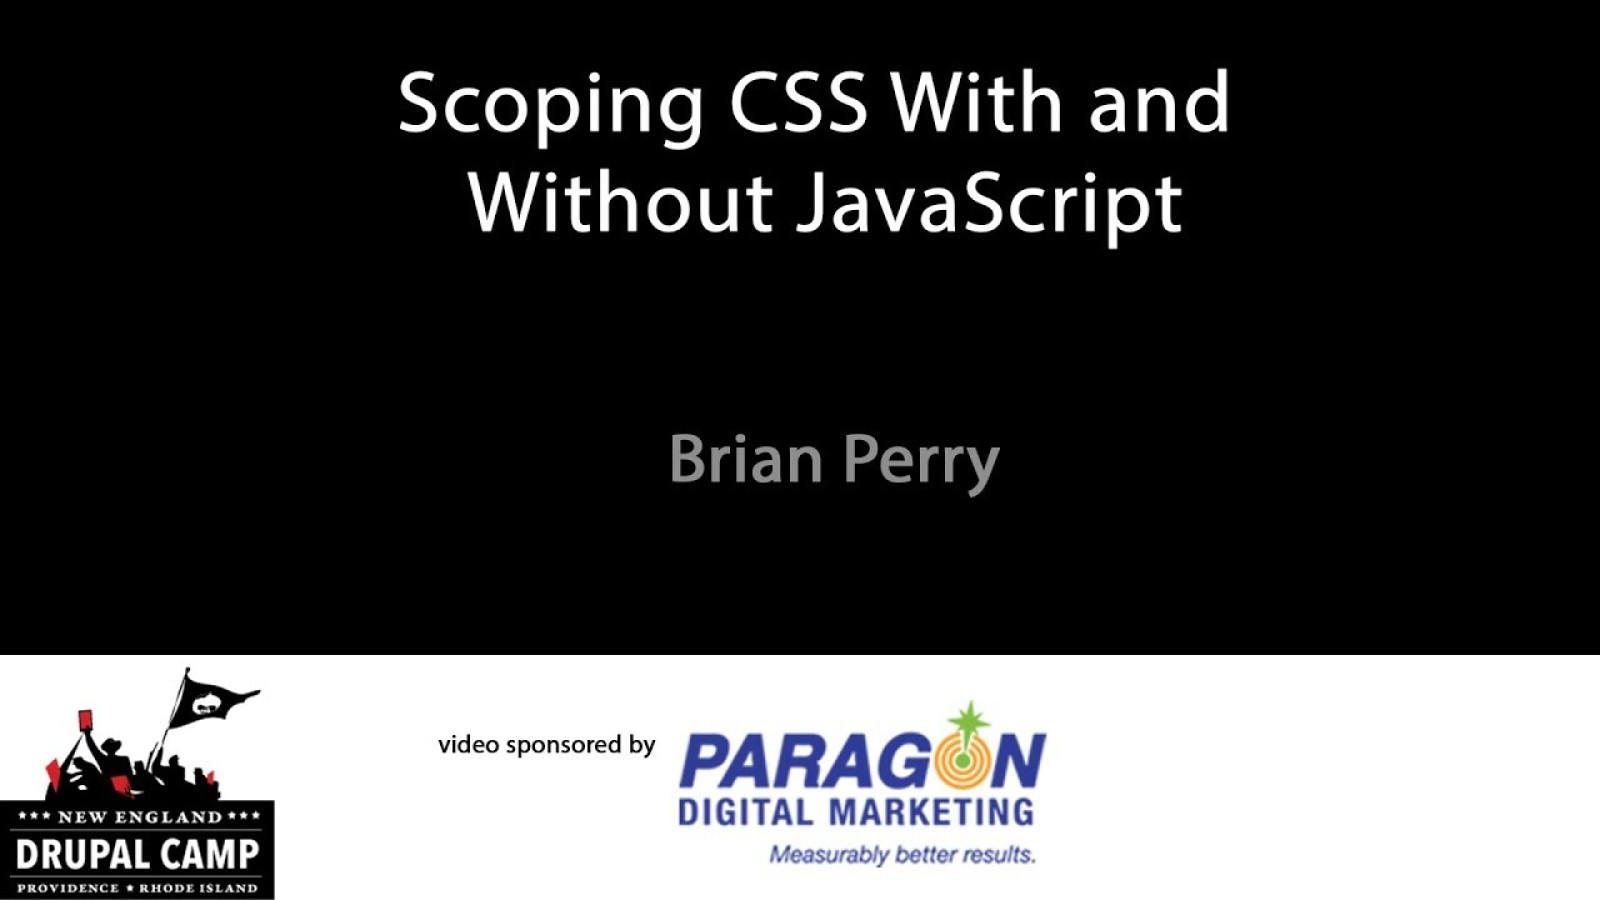 Scope In CSS With and Without JavaScript